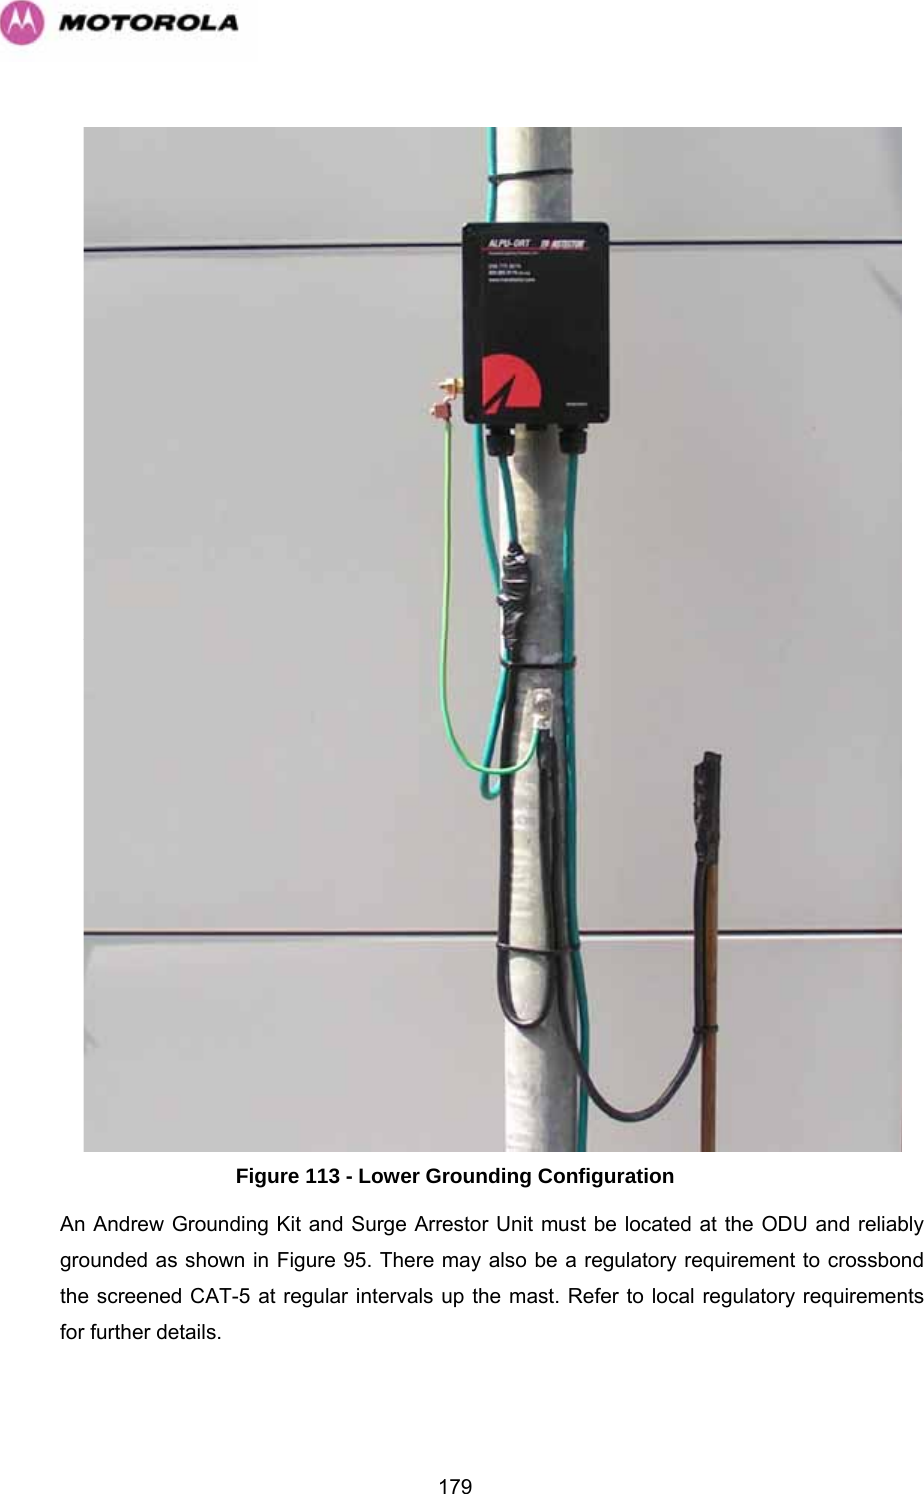   179   Figure 113 - Lower Grounding Configuration An Andrew Grounding Kit and Surge Arrestor Unit must be located at the ODU and reliably grounded as shown in Figure 95. There may also be a regulatory requirement to crossbond the screened CAT-5 at regular intervals up the mast. Refer to local regulatory requirements for further details.  